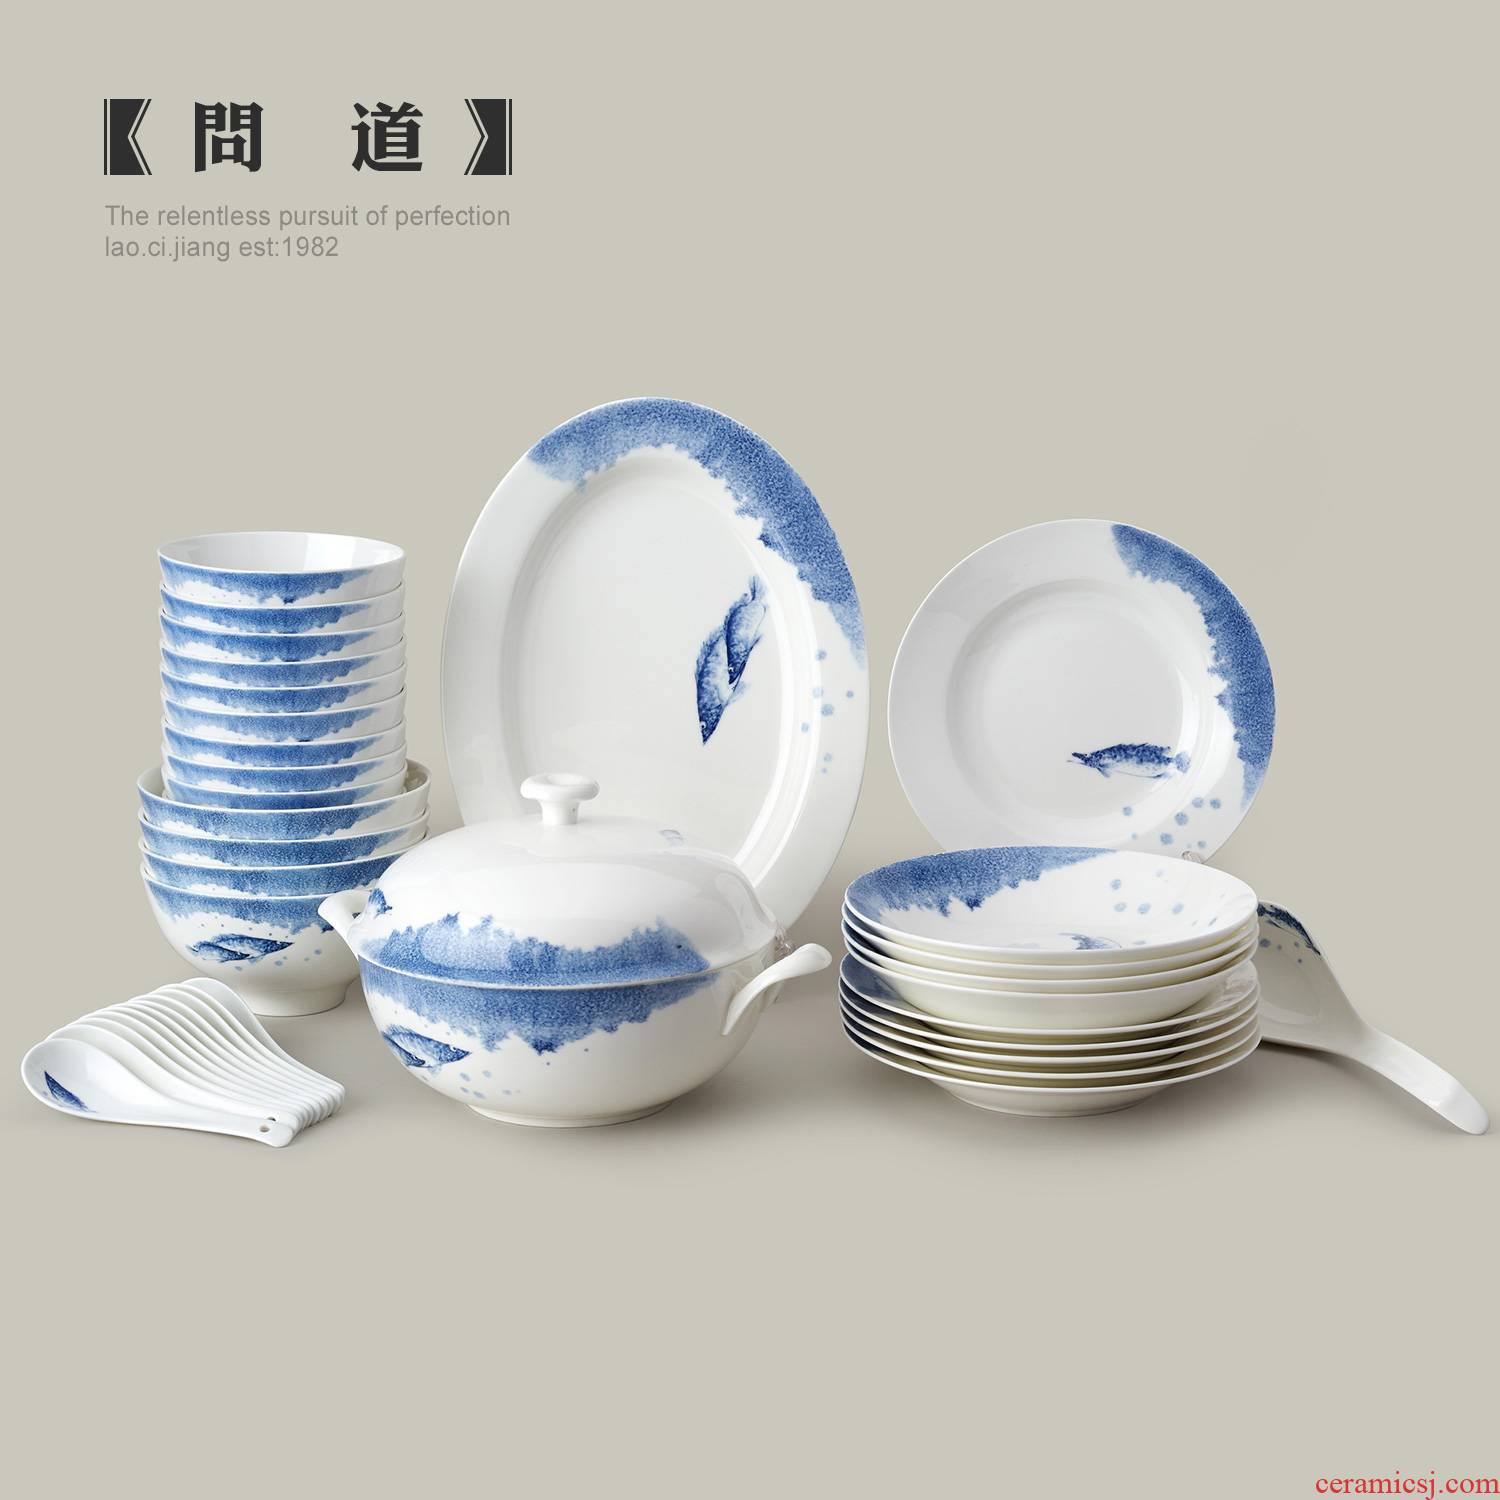 Old porcelain artisan ipads porcelain tableware suit household glair of blue and white porcelain bowl suit mandarin fish dishes dishes freehand brushwork in traditional Chinese